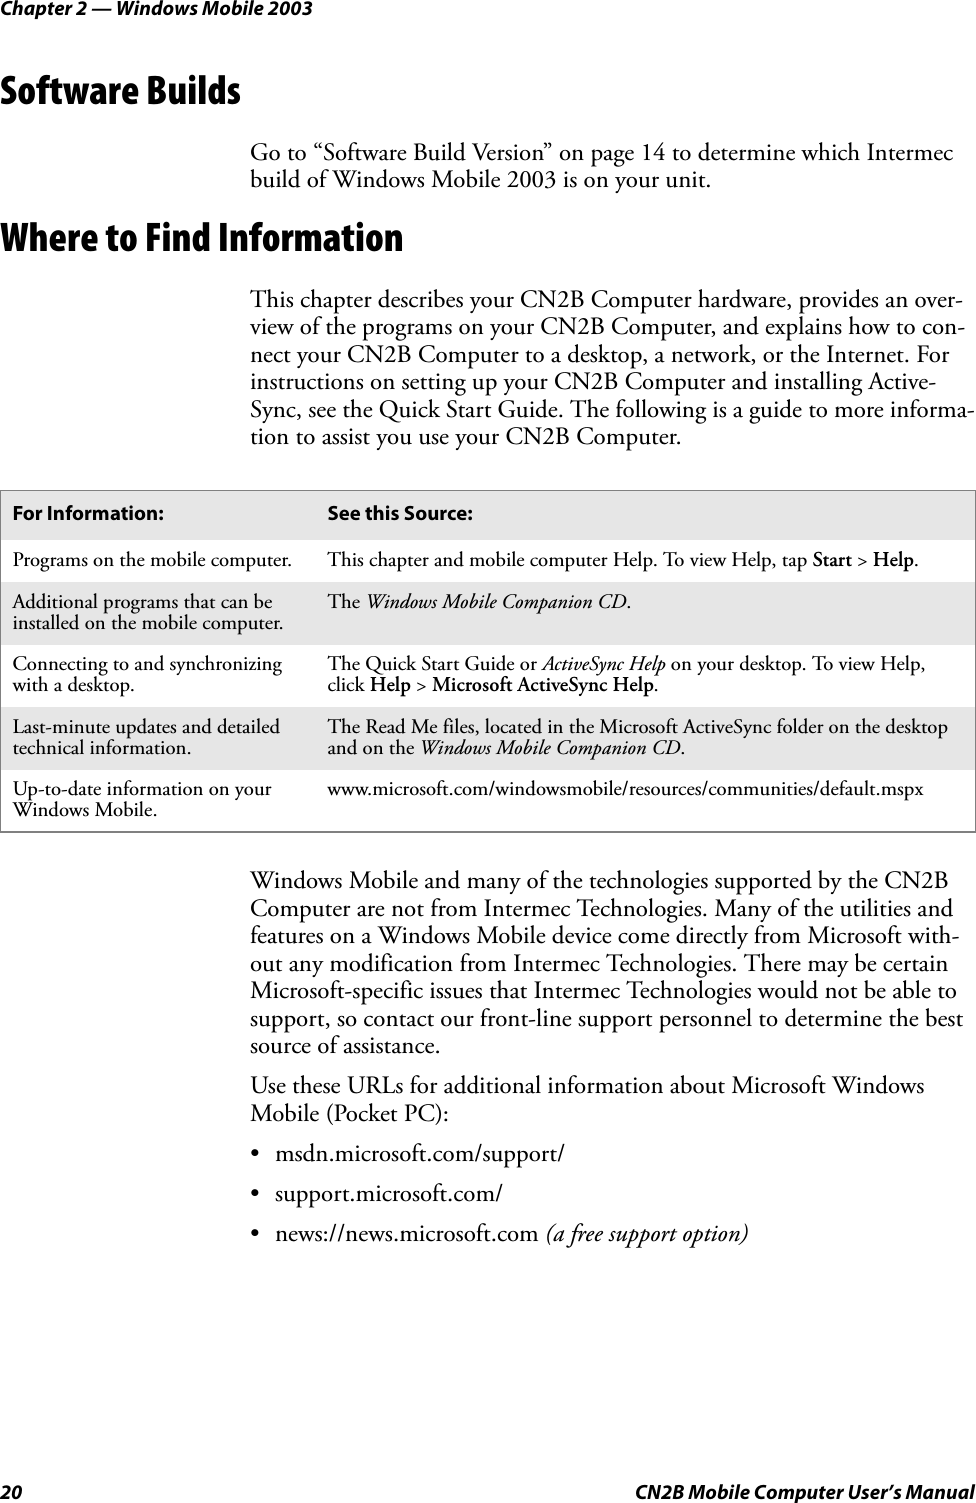 Chapter 2 — Windows Mobile 200320 CN2B Mobile Computer User’s ManualSoftware BuildsGo to “Software Build Version” on page 14 to determine which Intermec build of Windows Mobile 2003 is on your unit.Where to Find InformationThis chapter describes your CN2B Computer hardware, provides an over-view of the programs on your CN2B Computer, and explains how to con-nect your CN2B Computer to a desktop, a network, or the Internet. For instructions on setting up your CN2B Computer and installing Active-Sync, see the Quick Start Guide. The following is a guide to more informa-tion to assist you use your CN2B Computer.Windows Mobile and many of the technologies supported by the CN2B Computer are not from Intermec Technologies. Many of the utilities and features on a Windows Mobile device come directly from Microsoft with-out any modification from Intermec Technologies. There may be certain Microsoft-specific issues that Intermec Technologies would not be able to support, so contact our front-line support personnel to determine the best source of assistance.Use these URLs for additional information about Microsoft Windows Mobile (Pocket PC):• msdn.microsoft.com/support/• support.microsoft.com/• news://news.microsoft.com (a free support option)For Information: See this Source:Programs on the mobile computer. This chapter and mobile computer Help. To view Help, tap Start &gt; Help.Additional programs that can be installed on the mobile computer. The Windows Mobile Companion CD.Connecting to and synchronizing with a desktop. The Quick Start Guide or ActiveSync Help on your desktop. To view Help, click Help &gt; Microsoft ActiveSync Help.Last-minute updates and detailed technical information. The Read Me files, located in the Microsoft ActiveSync folder on the desktop and on the Windows Mobile Companion CD.Up-to-date information on your Windows Mobile. www.microsoft.com/windowsmobile/resources/communities/default.mspx